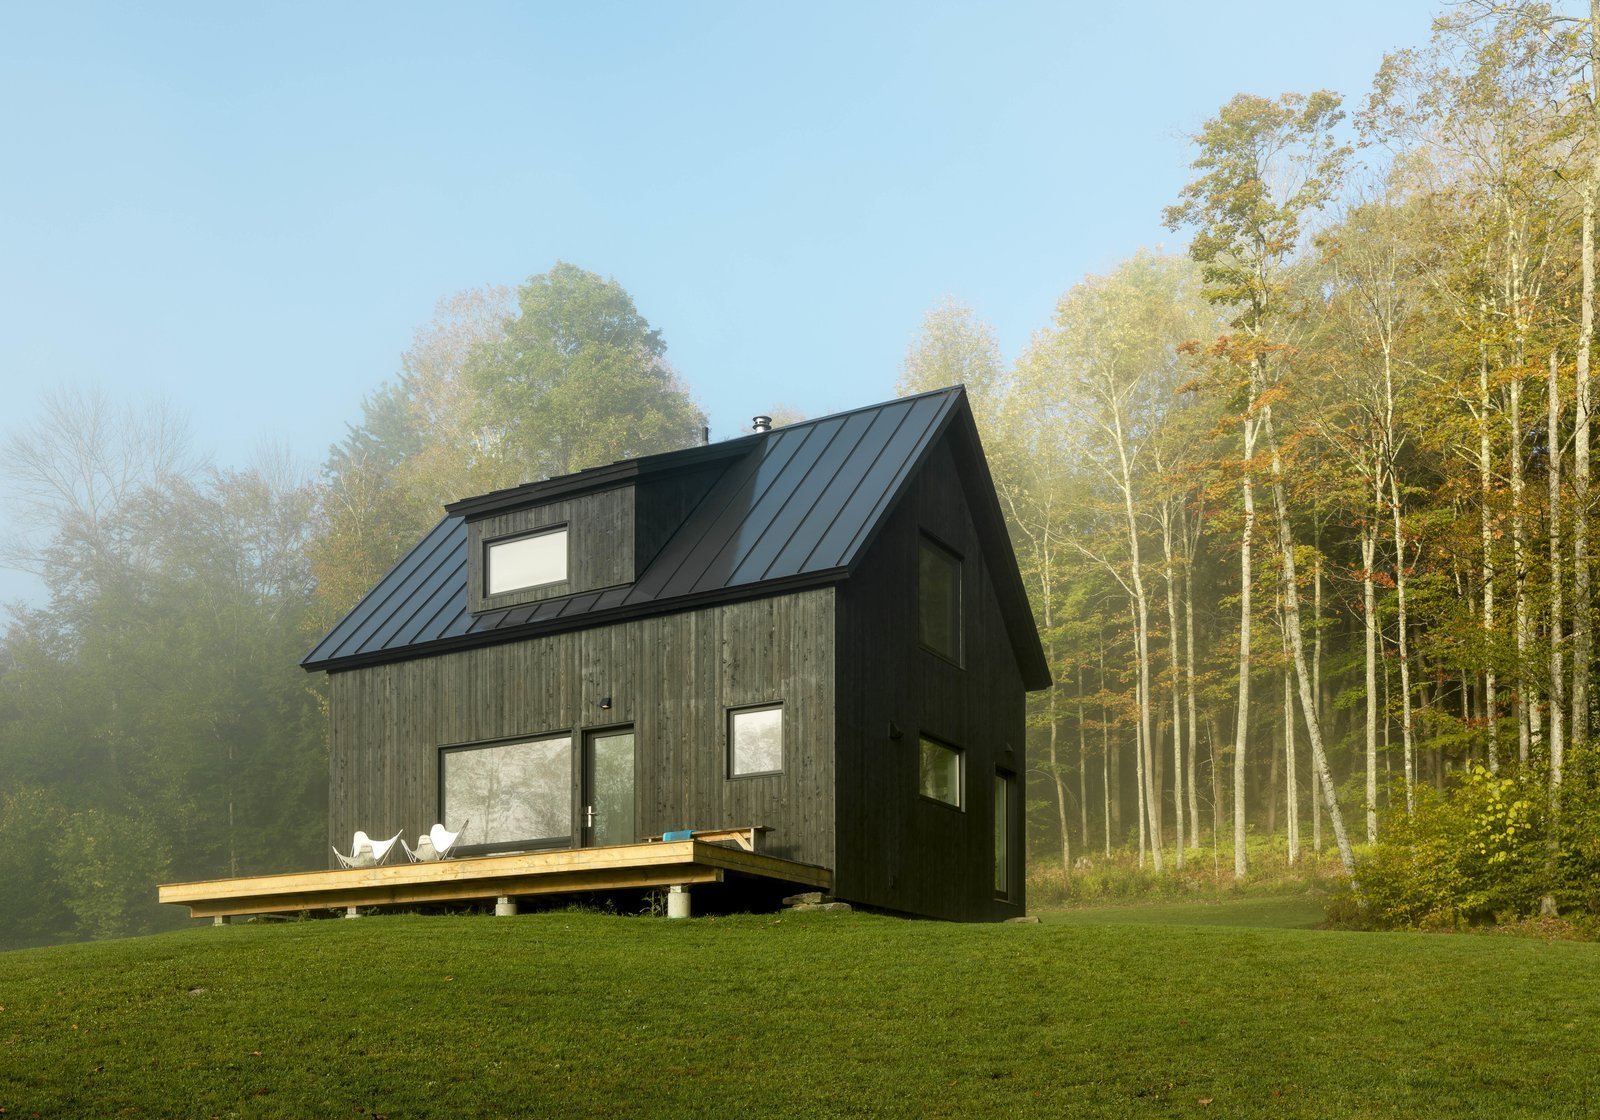 15 Black Cabins That Make the Case for Dark Exteriors